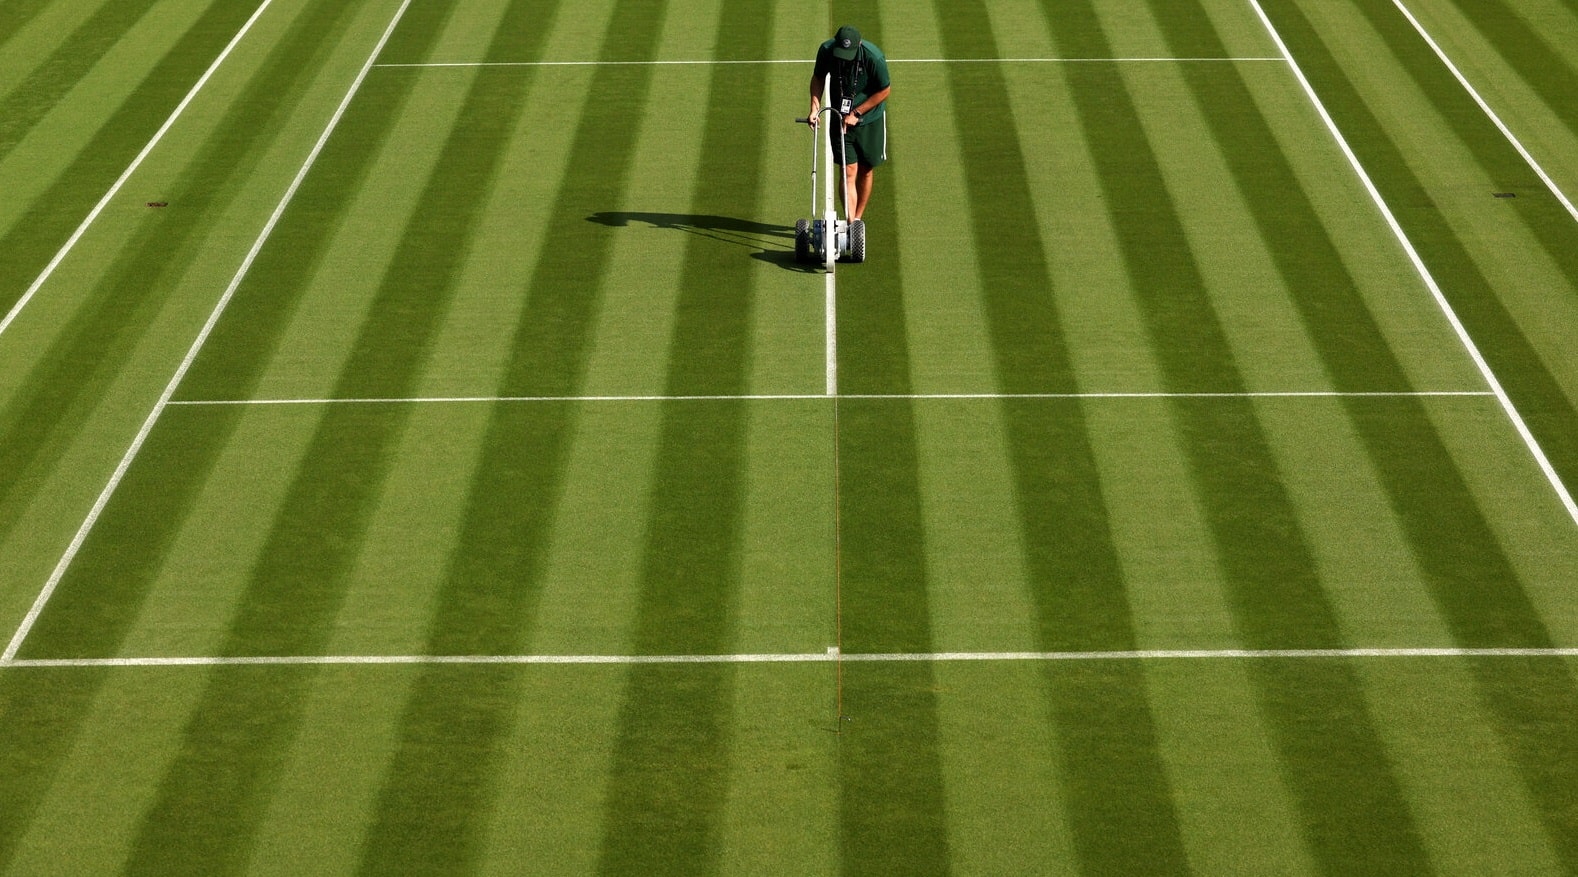 How Many Grass Court Tennis Tournaments Are There